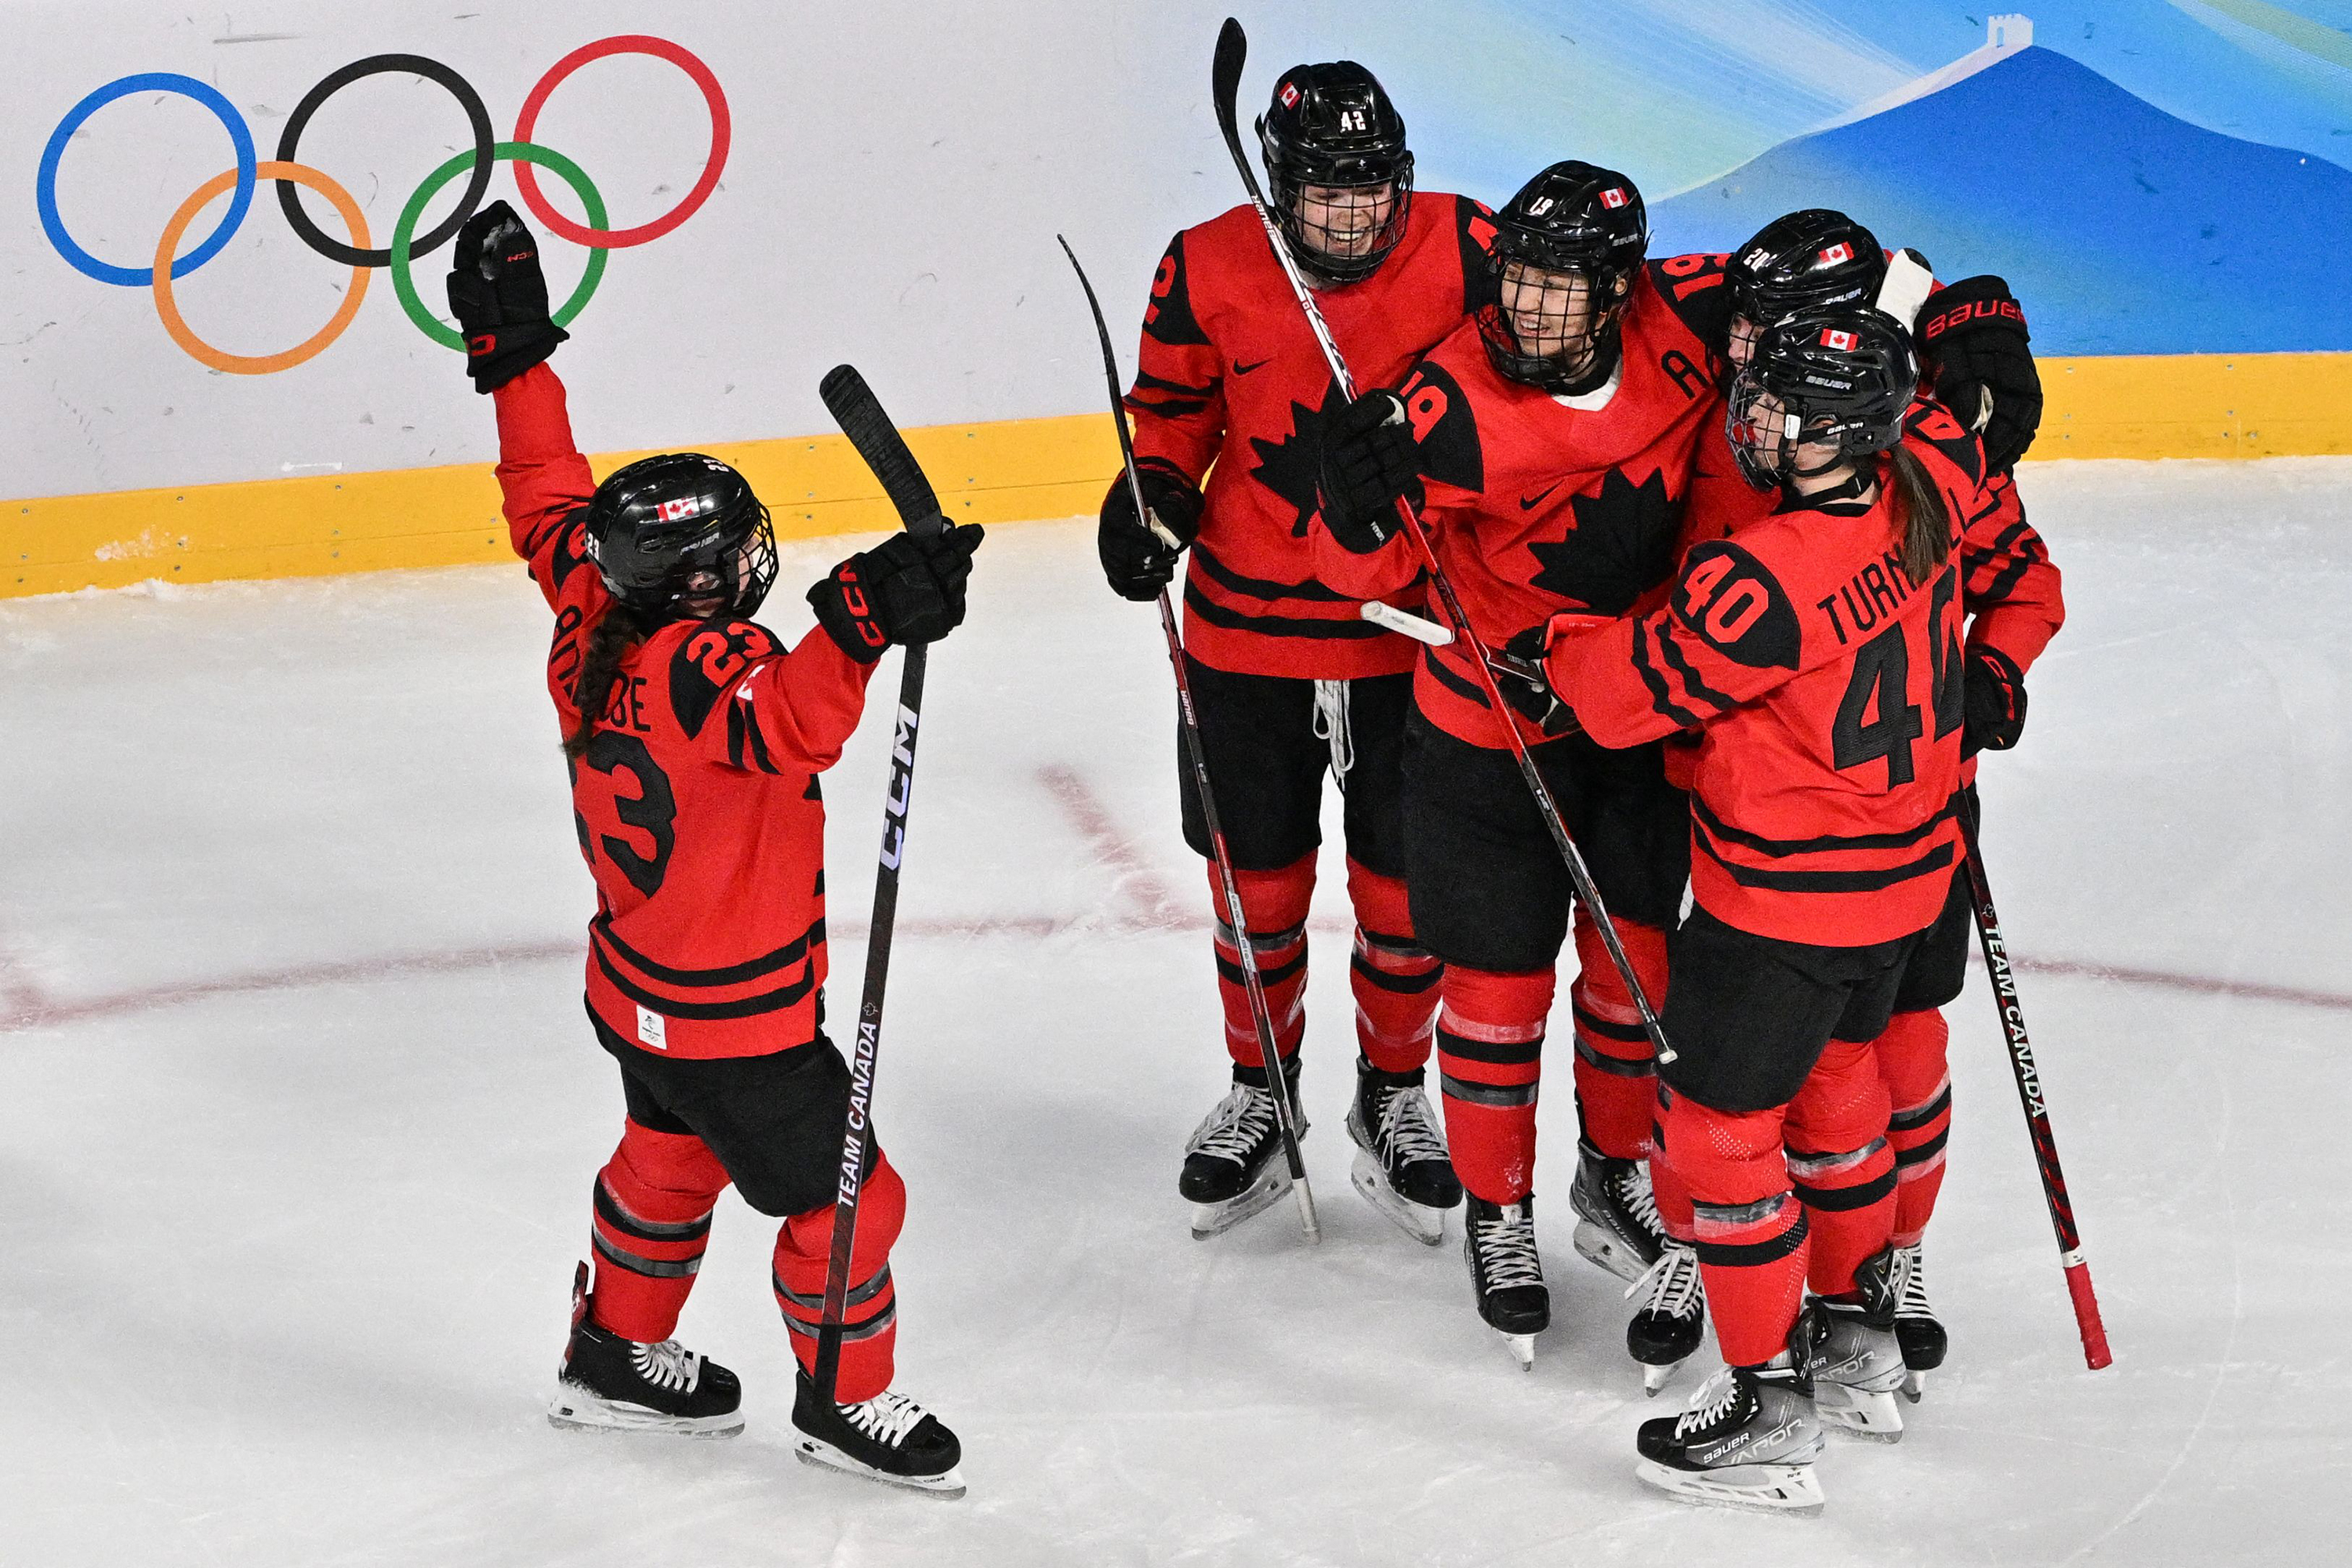 Canadian women’s ice hockey team defeated Finland after they won their first opening match against Switzerland on February 5.